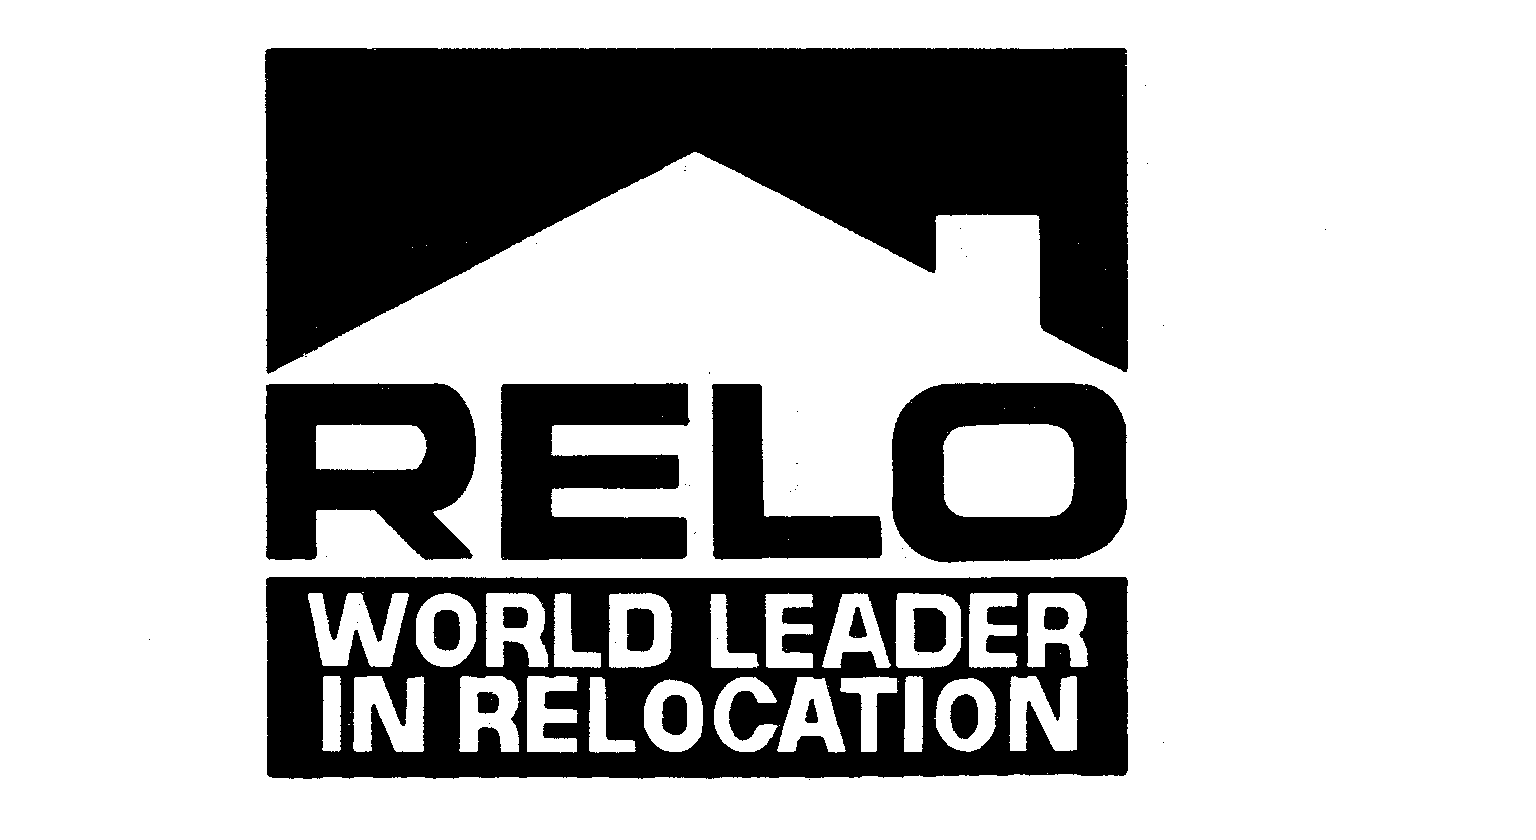  RELO WORLD LEADER IN RELOCATION